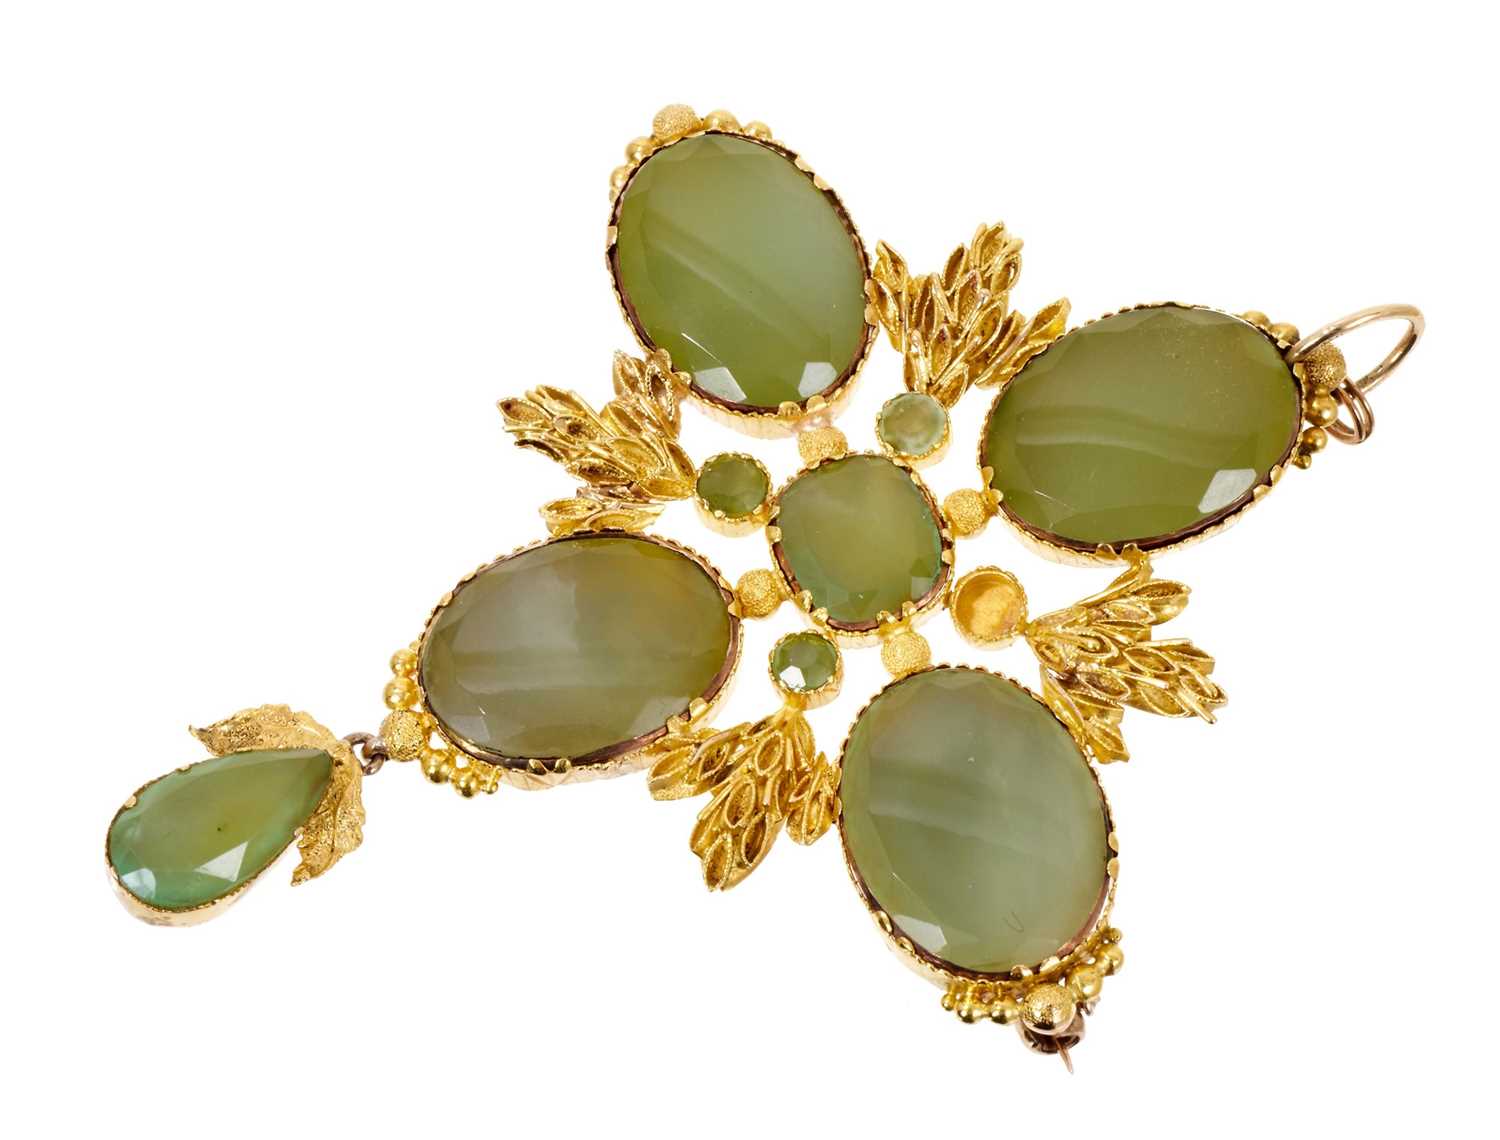 Regency-style gold and green stone pendant/brooch